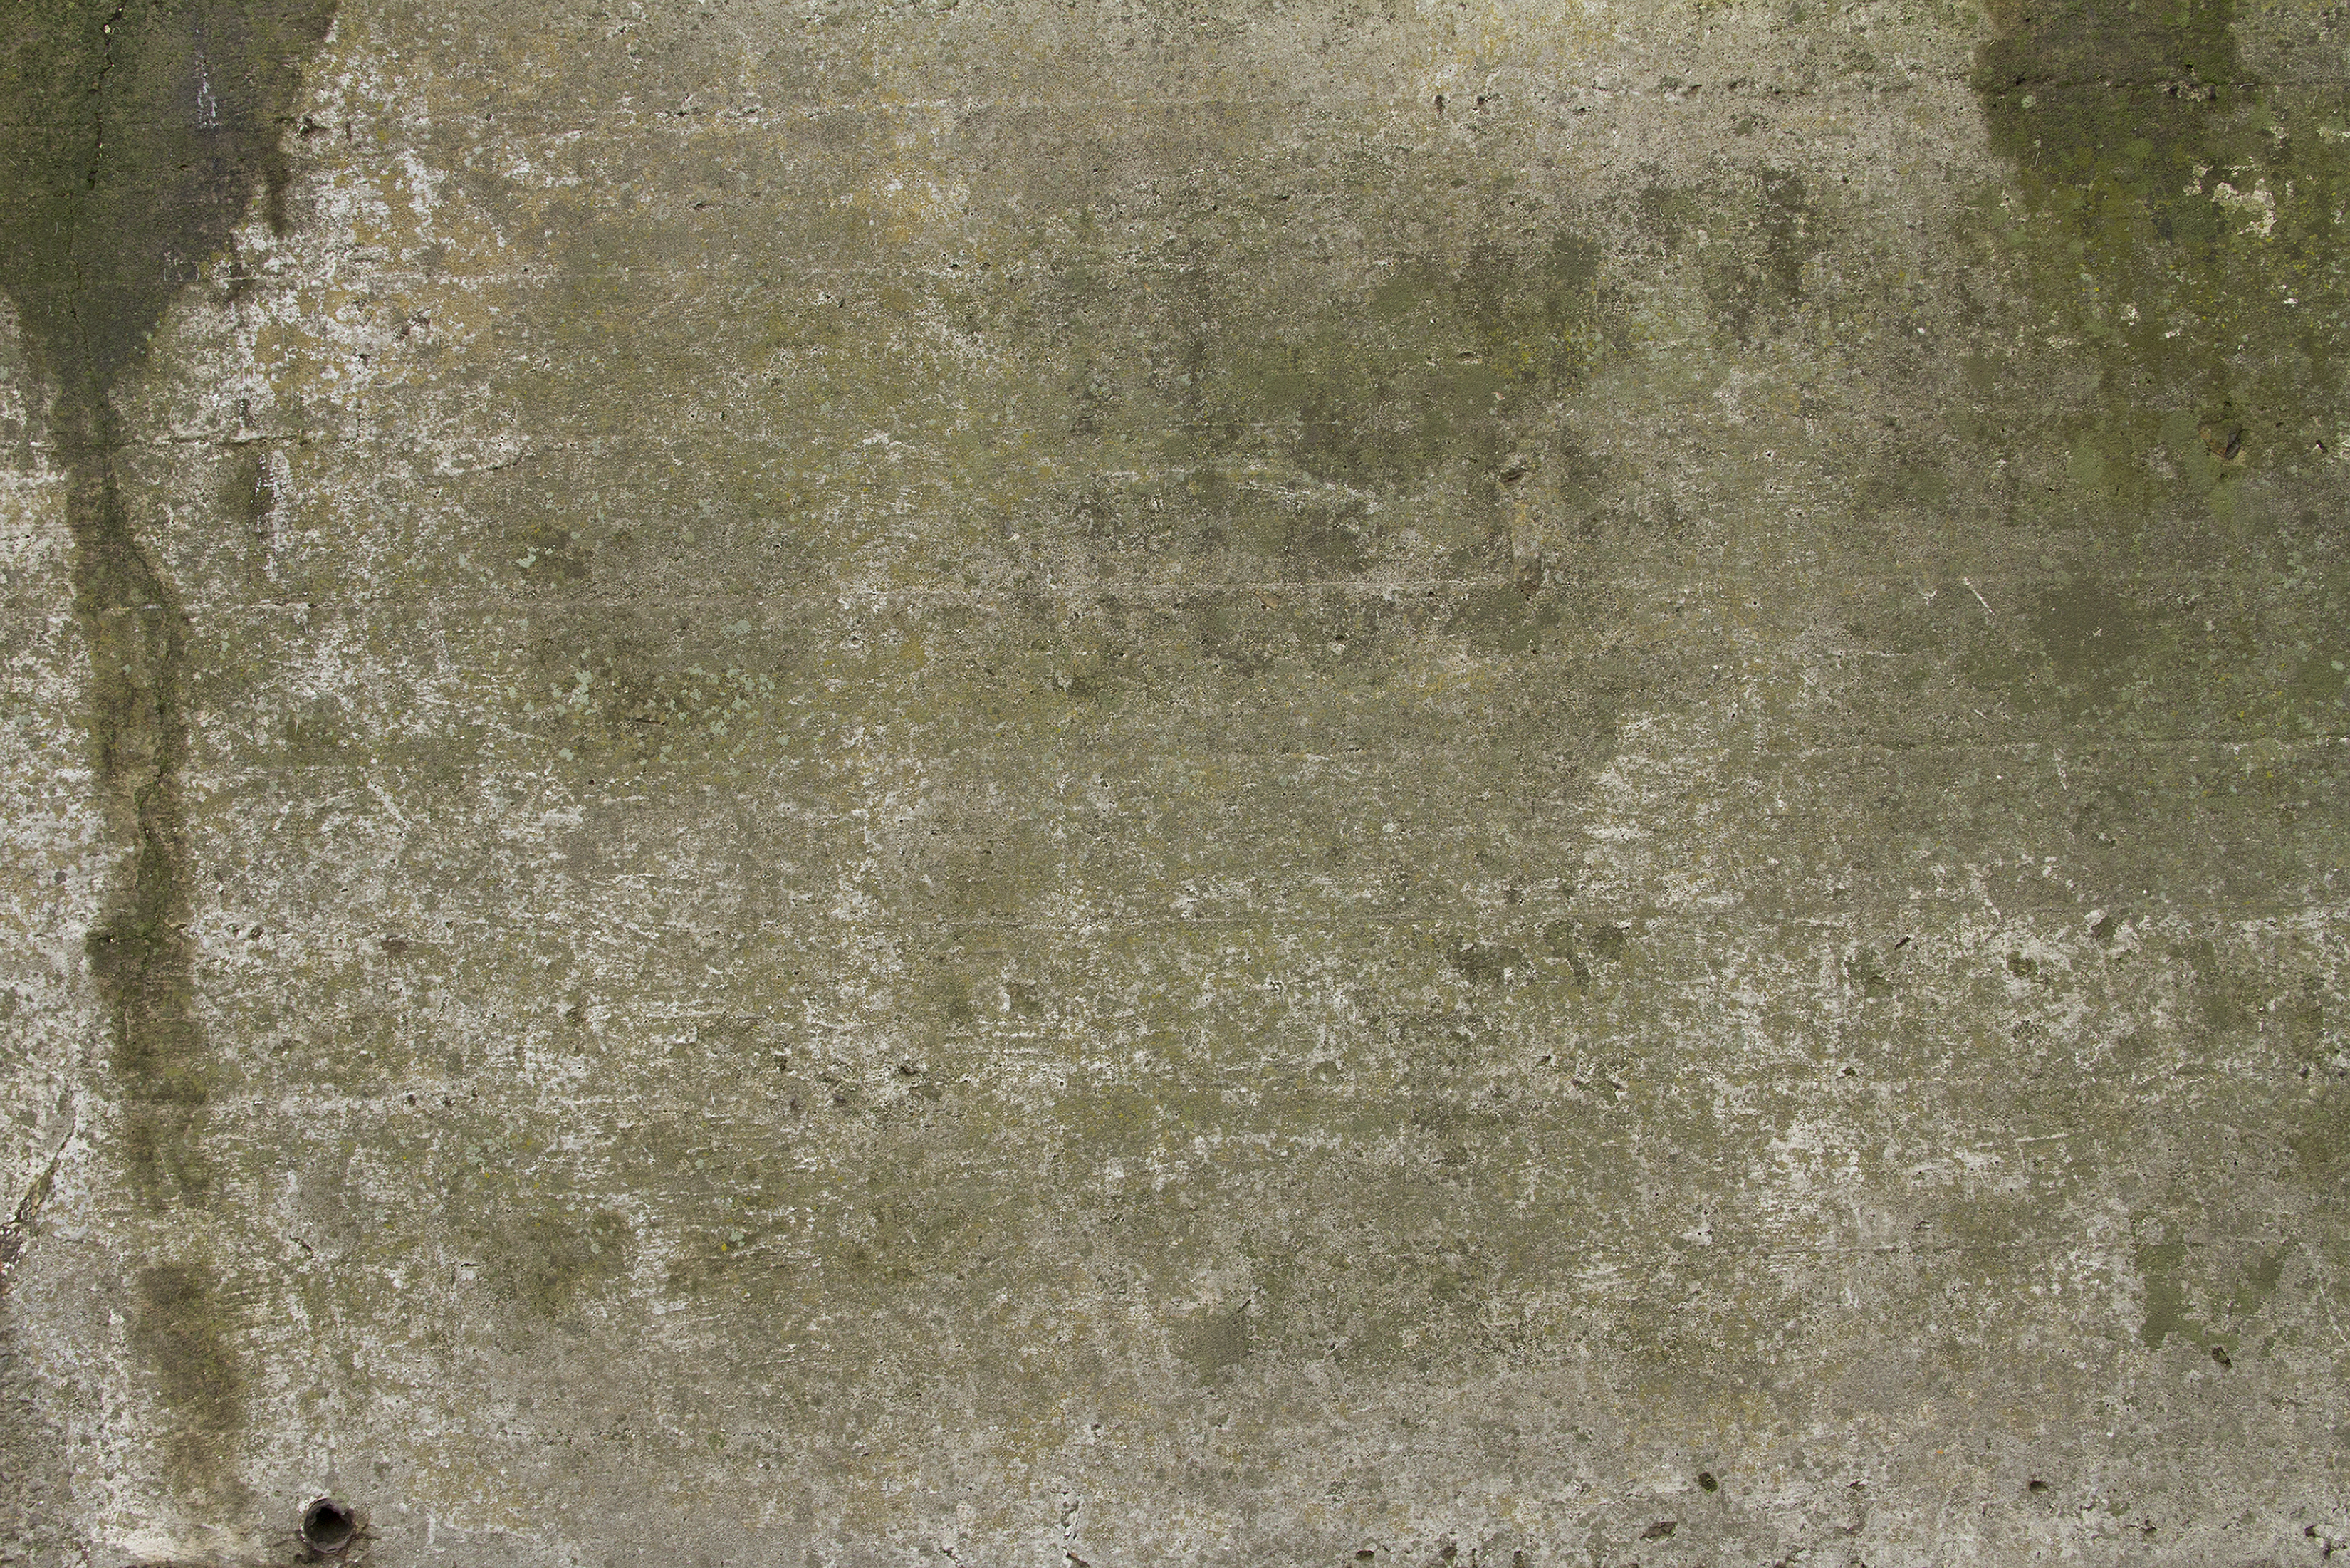 Dirty Brown Concrete Grunge Texture - 14Textures